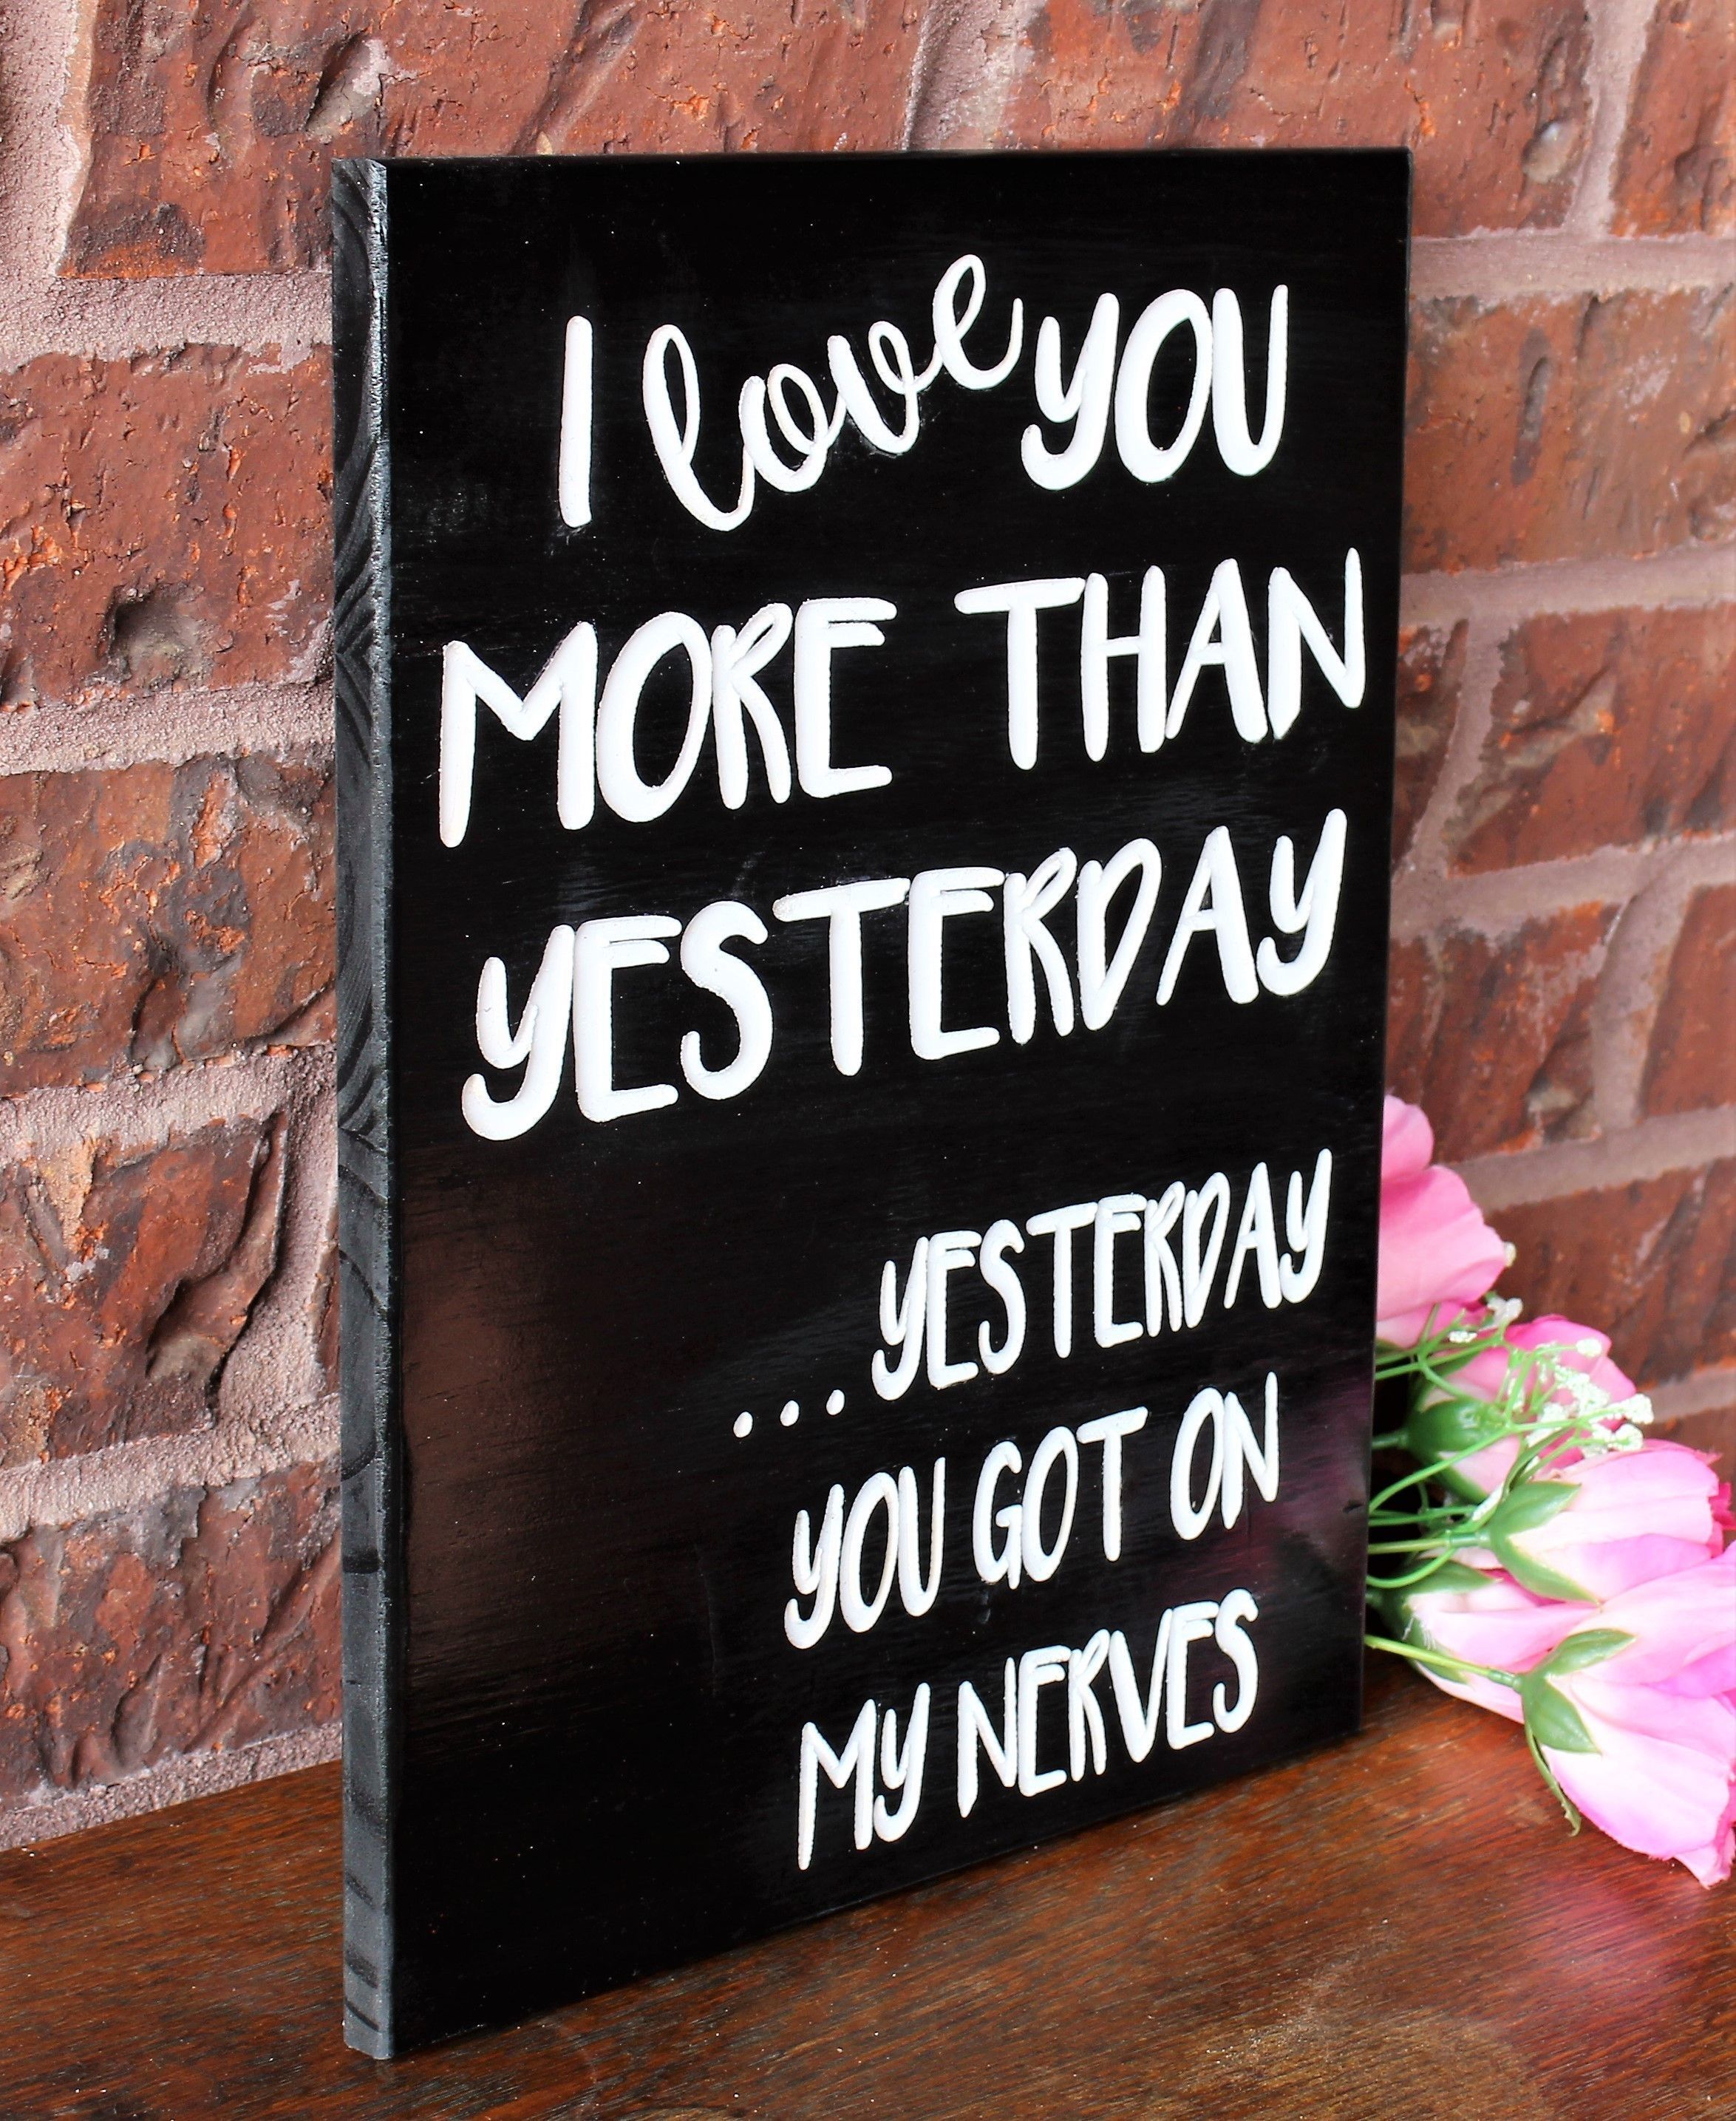 I Love You More Than Yesterday Carved Wood Sign, Funny Quote Wall In Wood Wall Art Quotes (View 20 of 20)